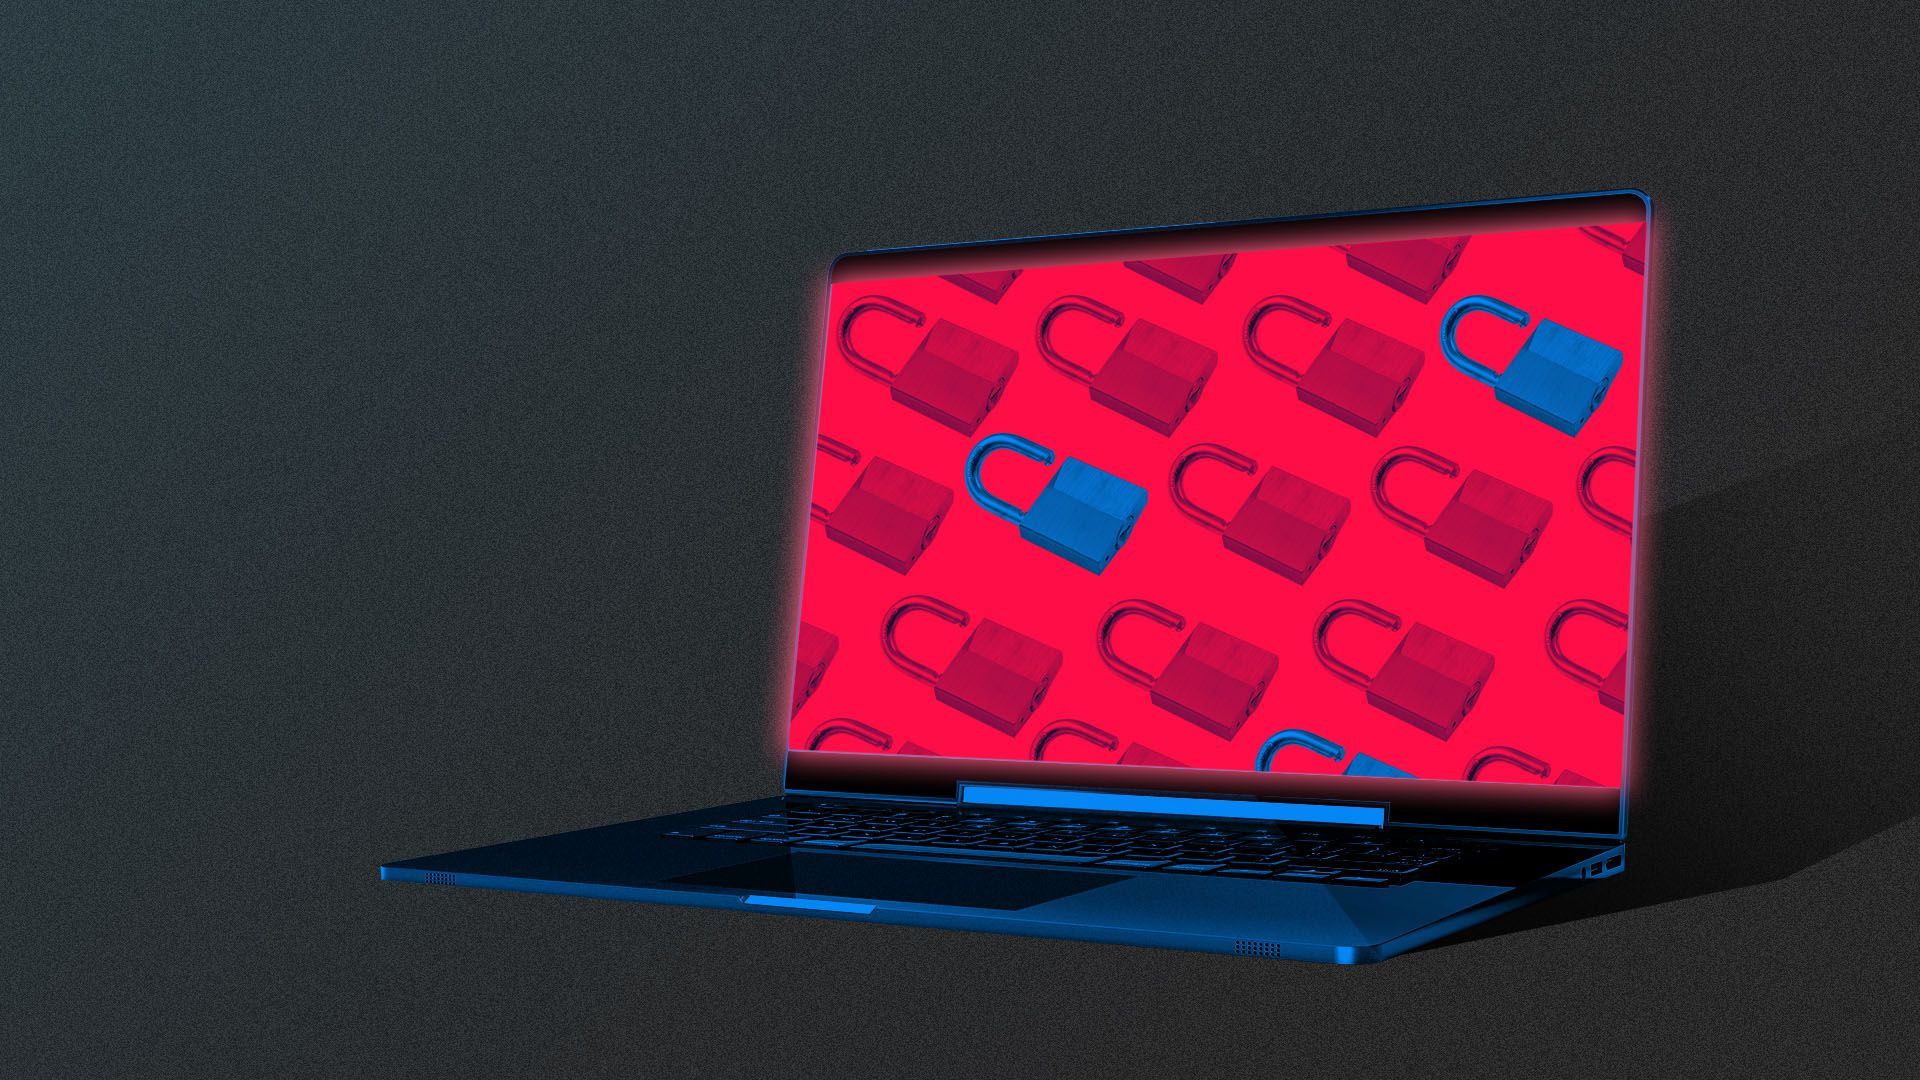 An illustration of a laptop with open locks on the screen